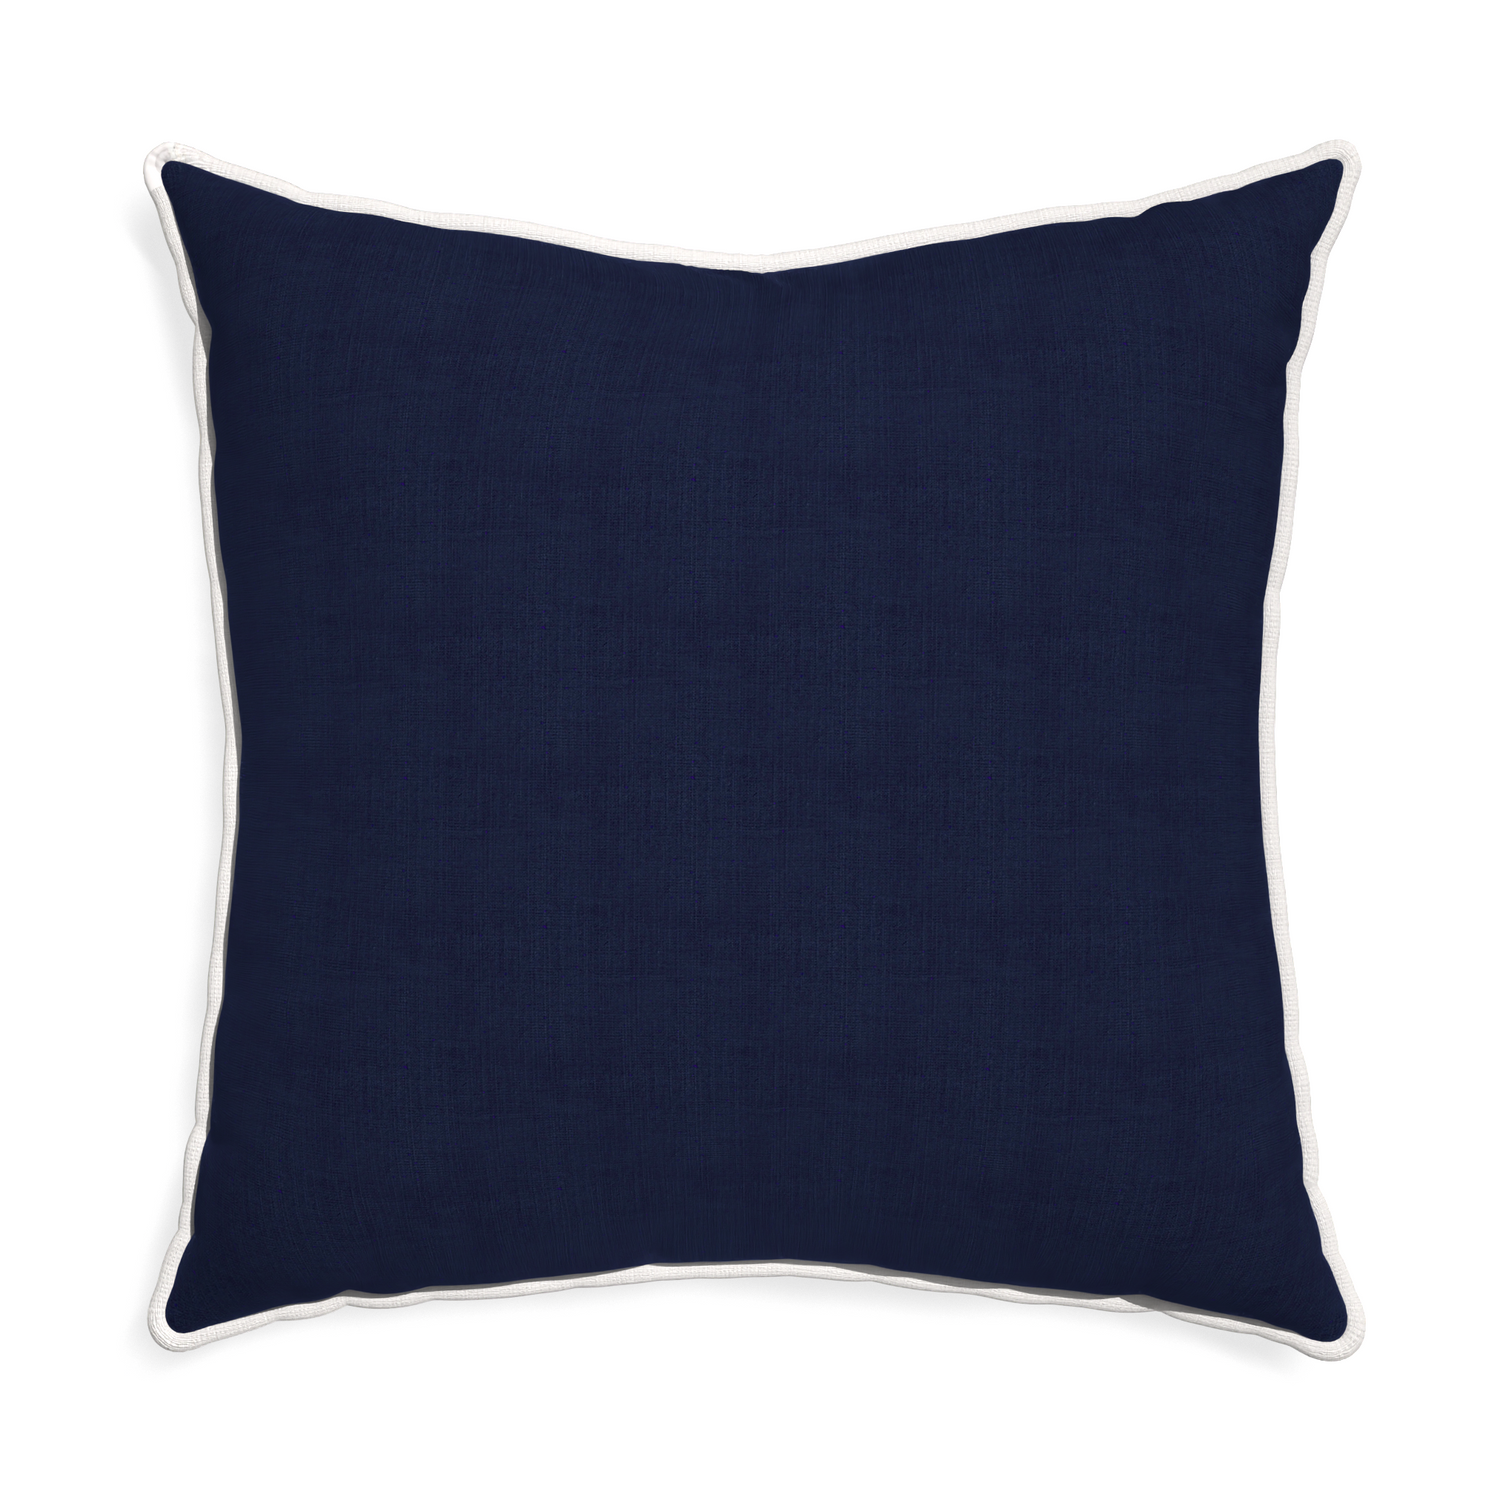 Euro-sham midnight custom navy bluepillow with snow piping on white background